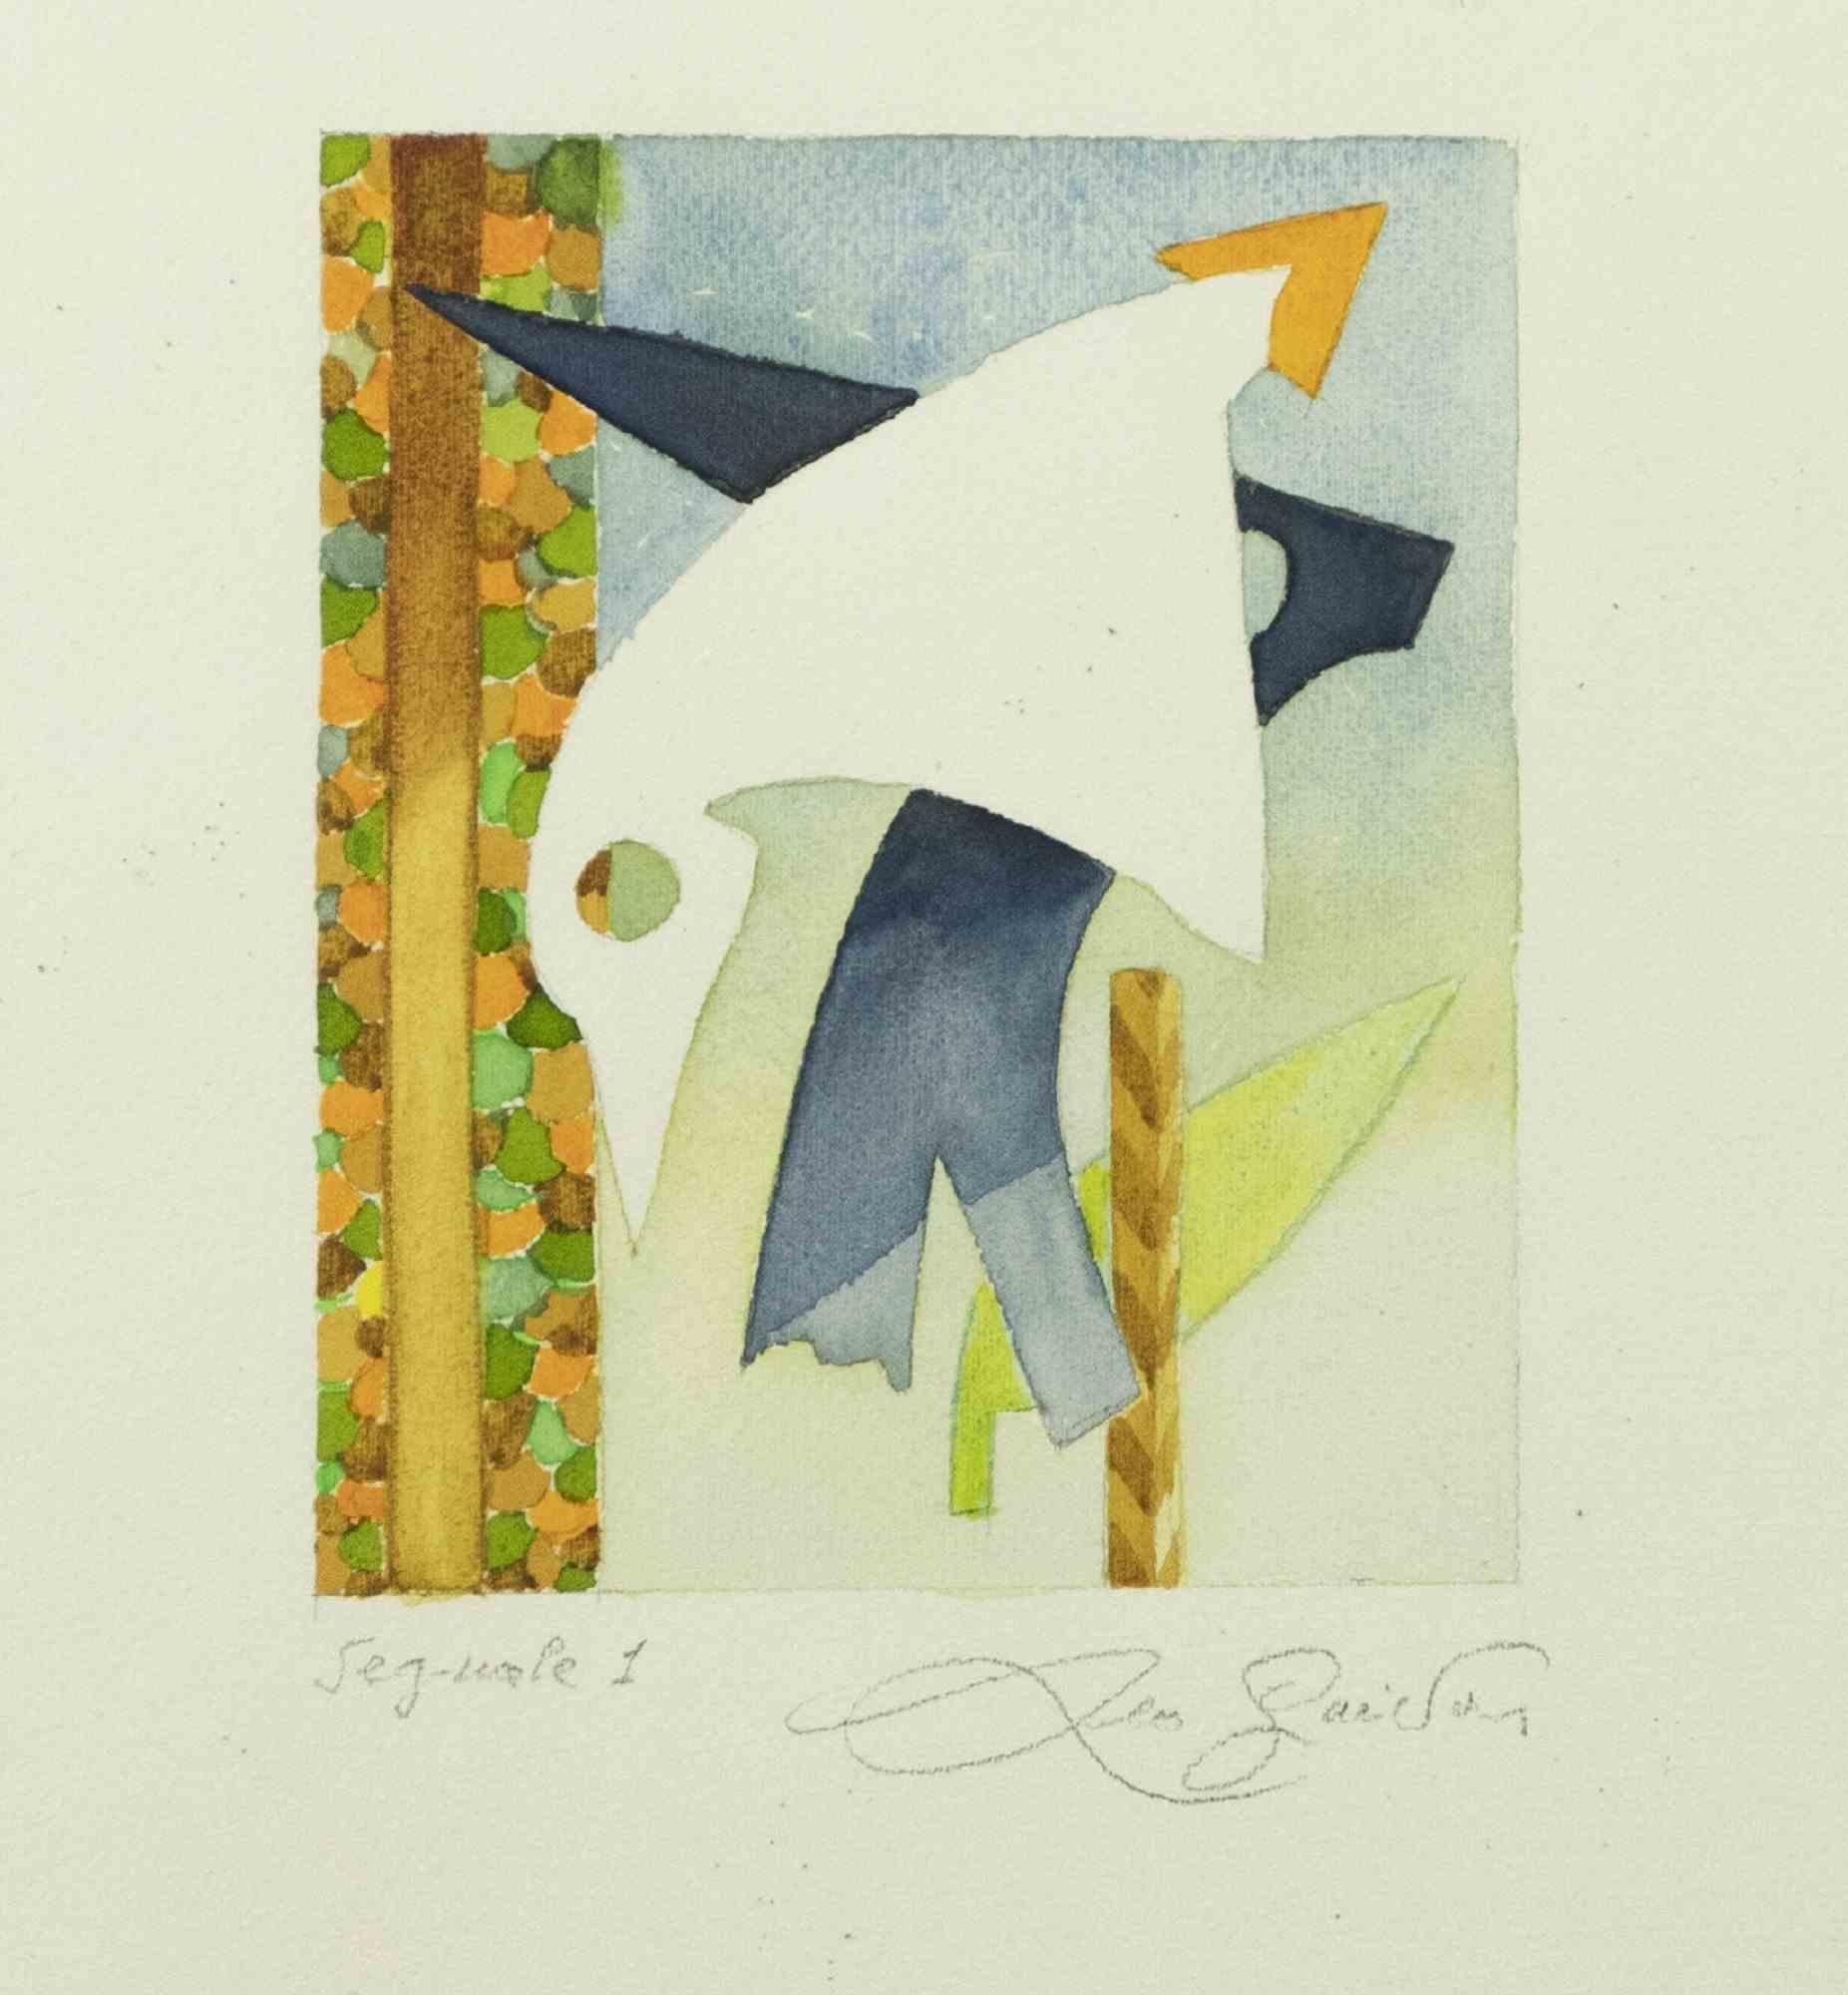 Signal 1 is a contemporary artwork realized by Leo Guida in 1970s

Mixed colored ink and watercolor on paper.

Hand signed, titled on the lower margin

Includes frame: 63.5 x 49 cm

Leo Guida  (1992 - 2017). Sensitive to current issues, artistic